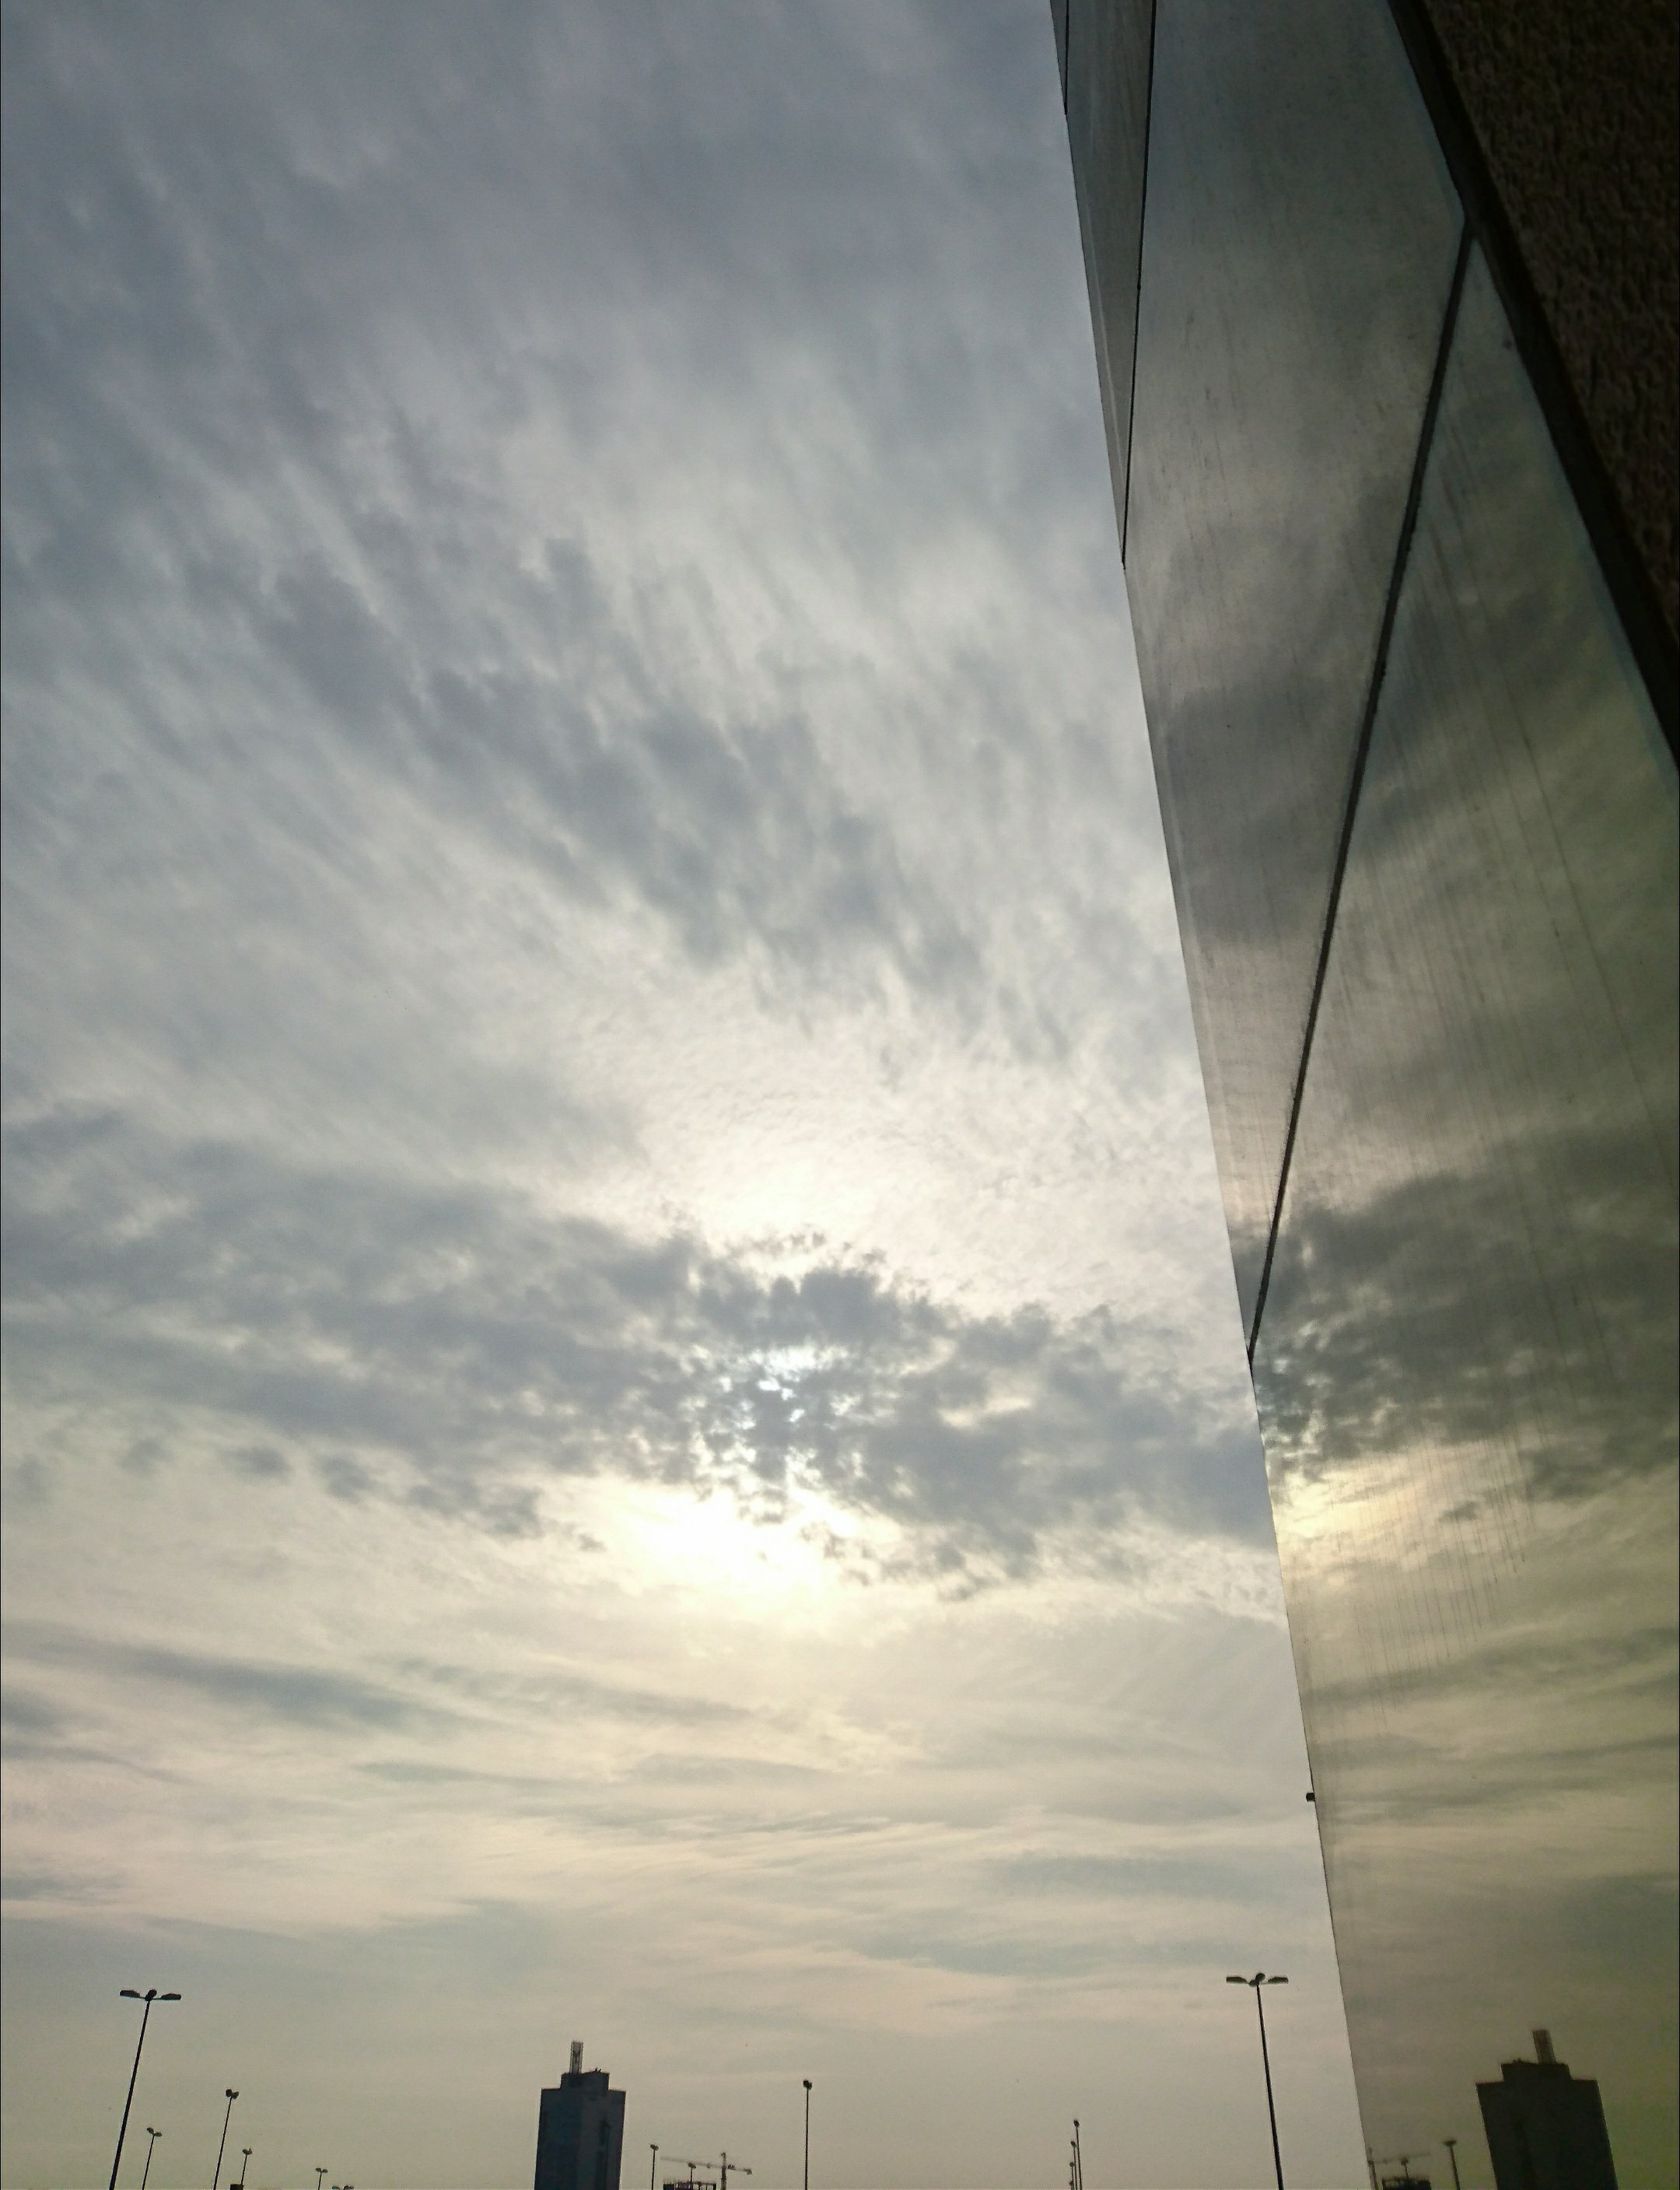 Reflection of the sky on glass 